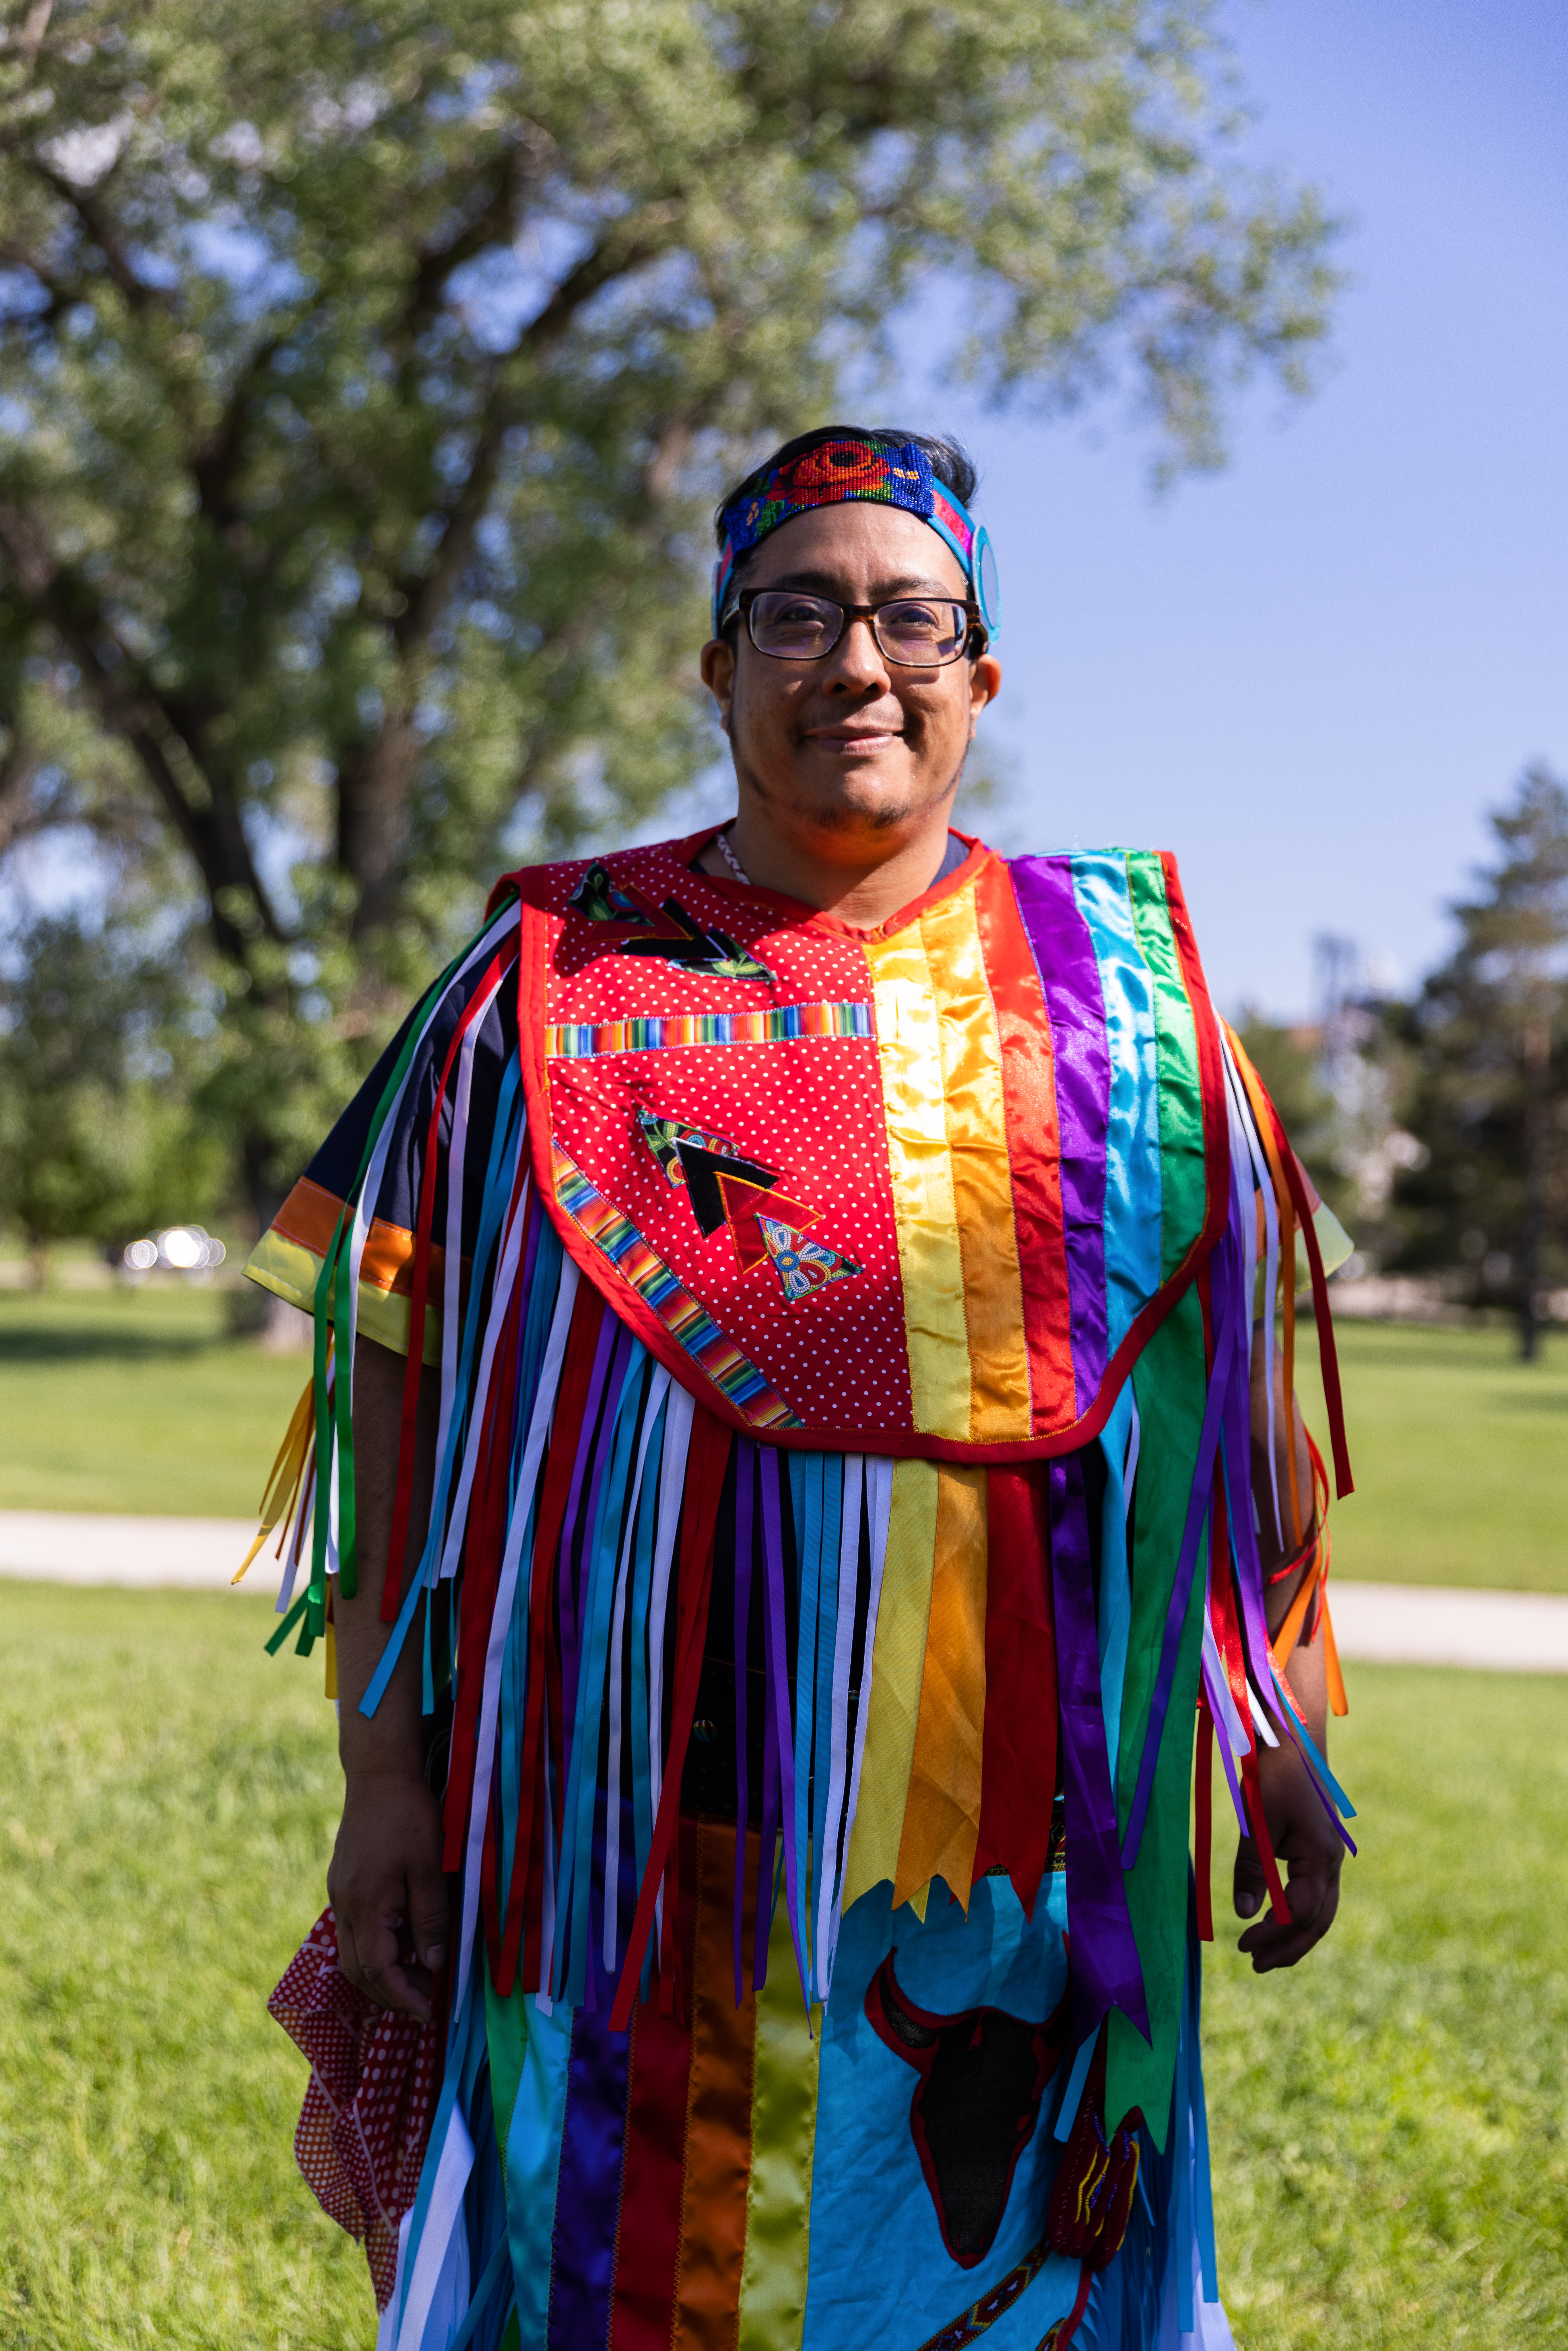 A person with medium-tone skin wearing colorful regalia and smiling at the camera.